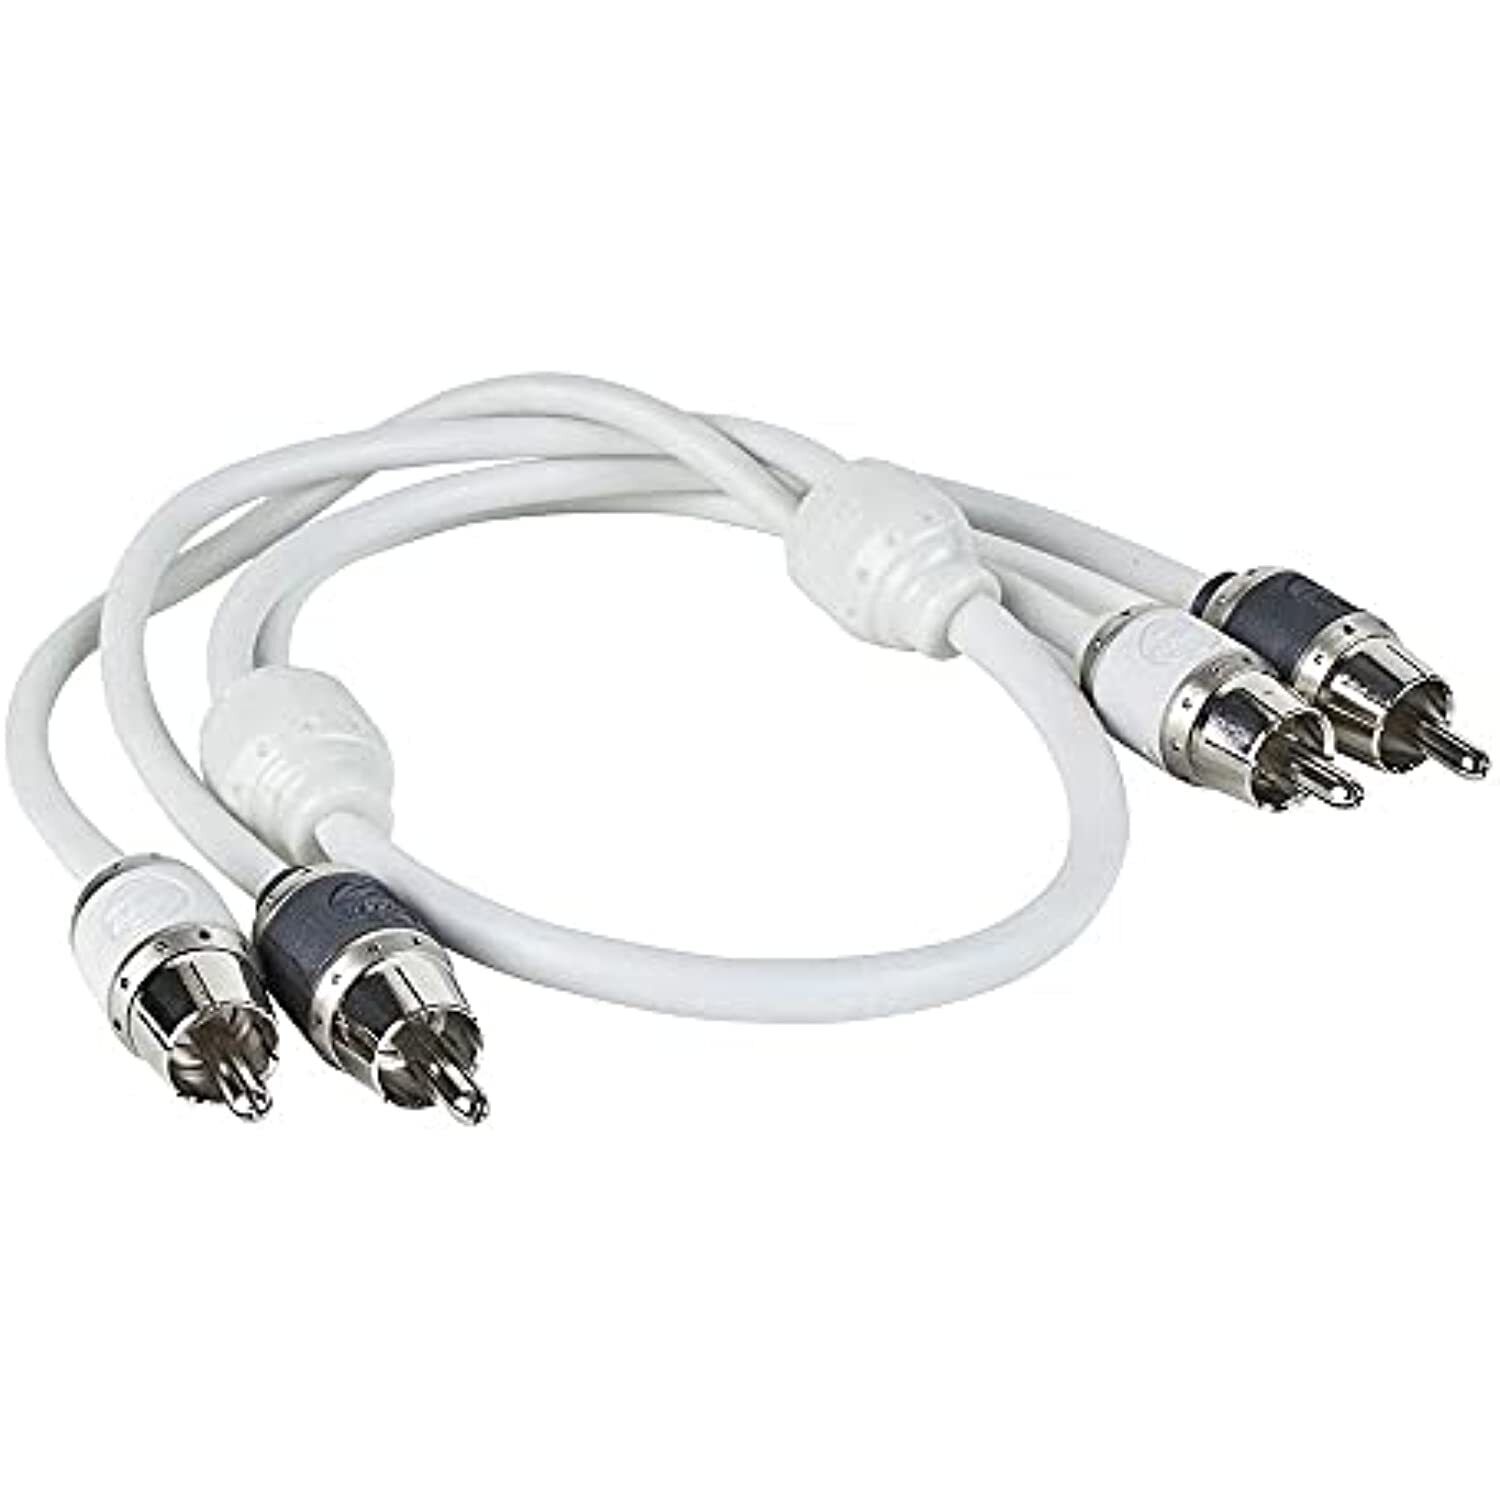 T-Spec RCA v10 Series 2-Channel Audio Cable - 1.5 FT